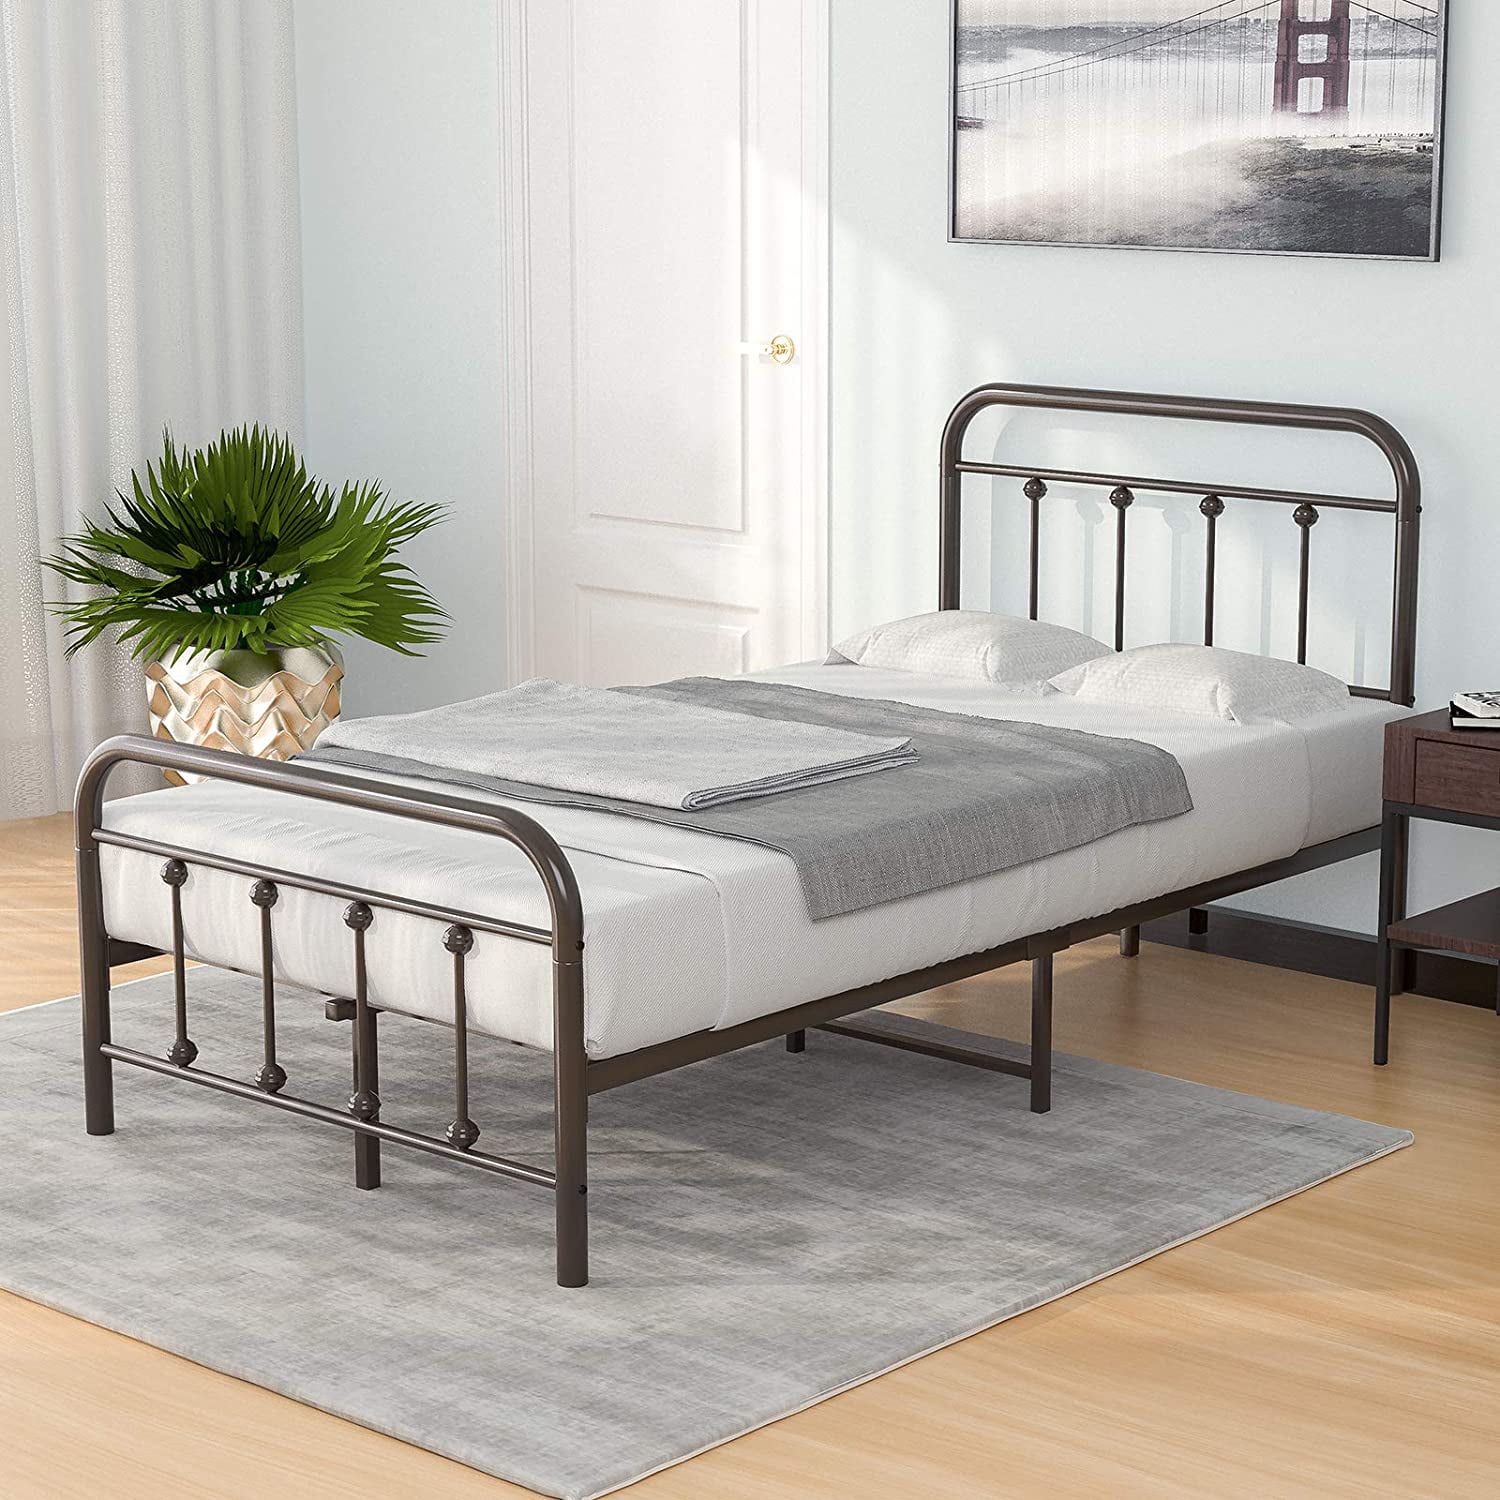 Mecor Metal Twin Bed Frame With Vintage, Old Metal Twin Bed